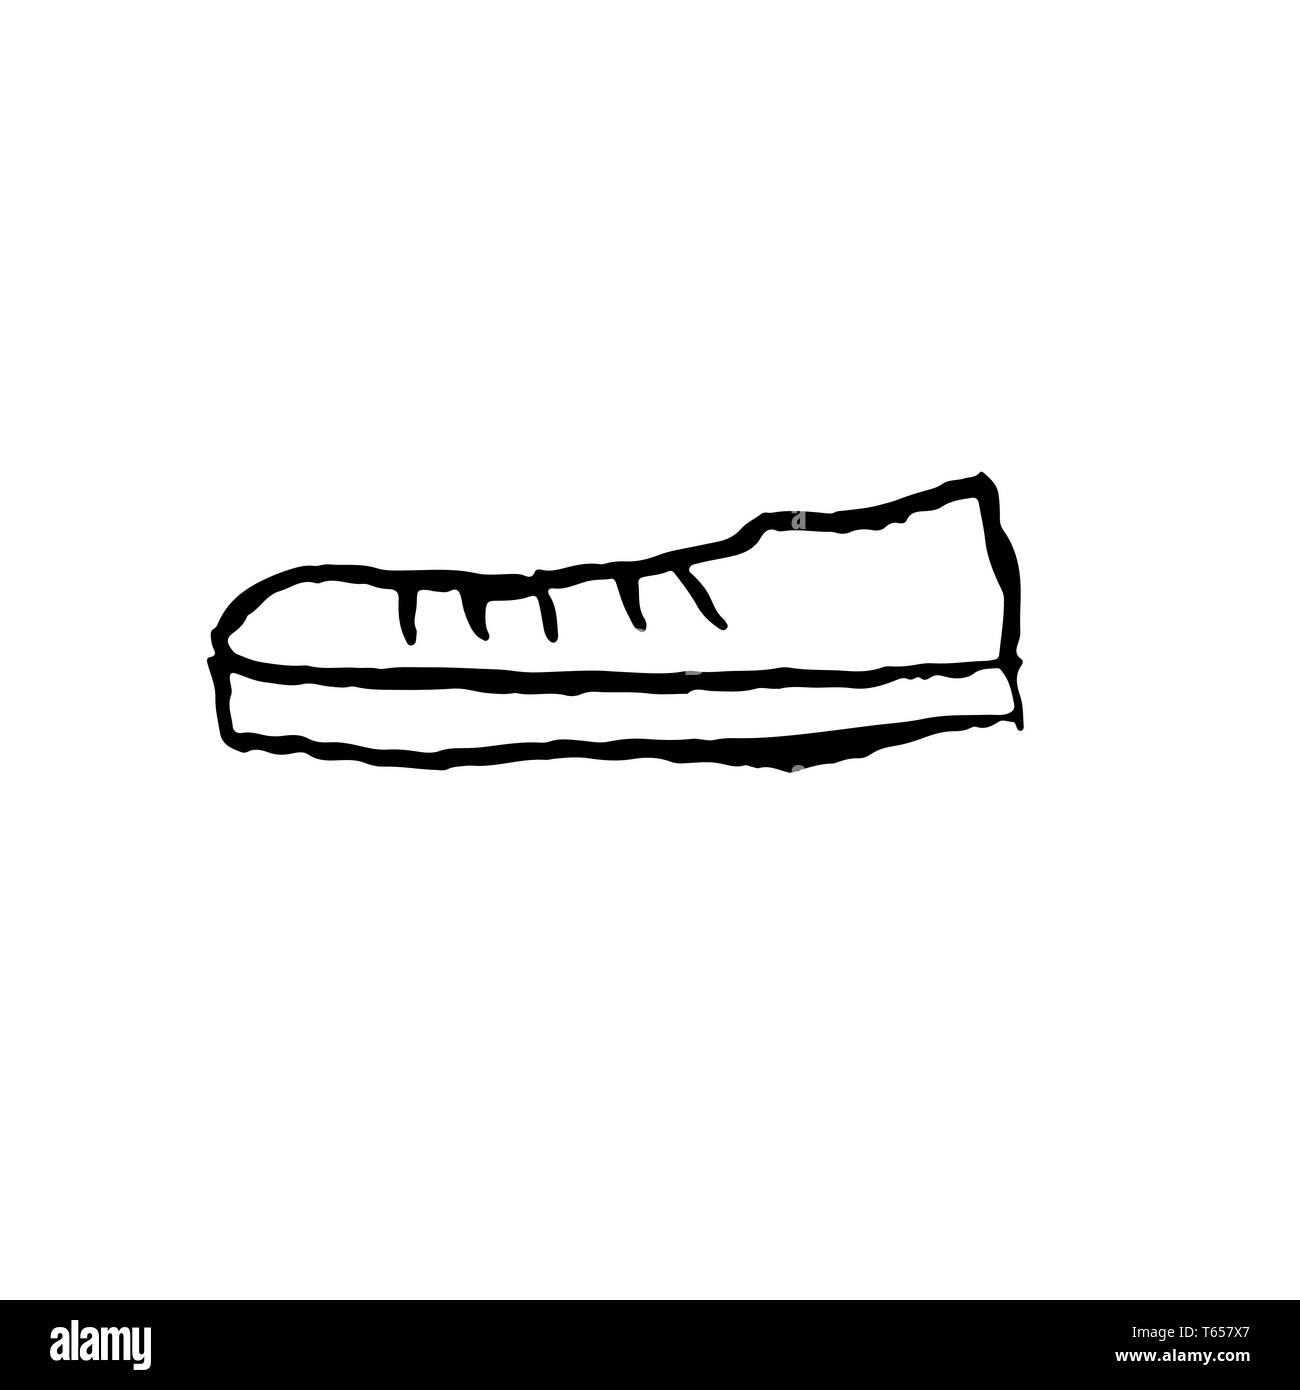 Sneakers icon. Grunge brush vector icon. Stock Vector